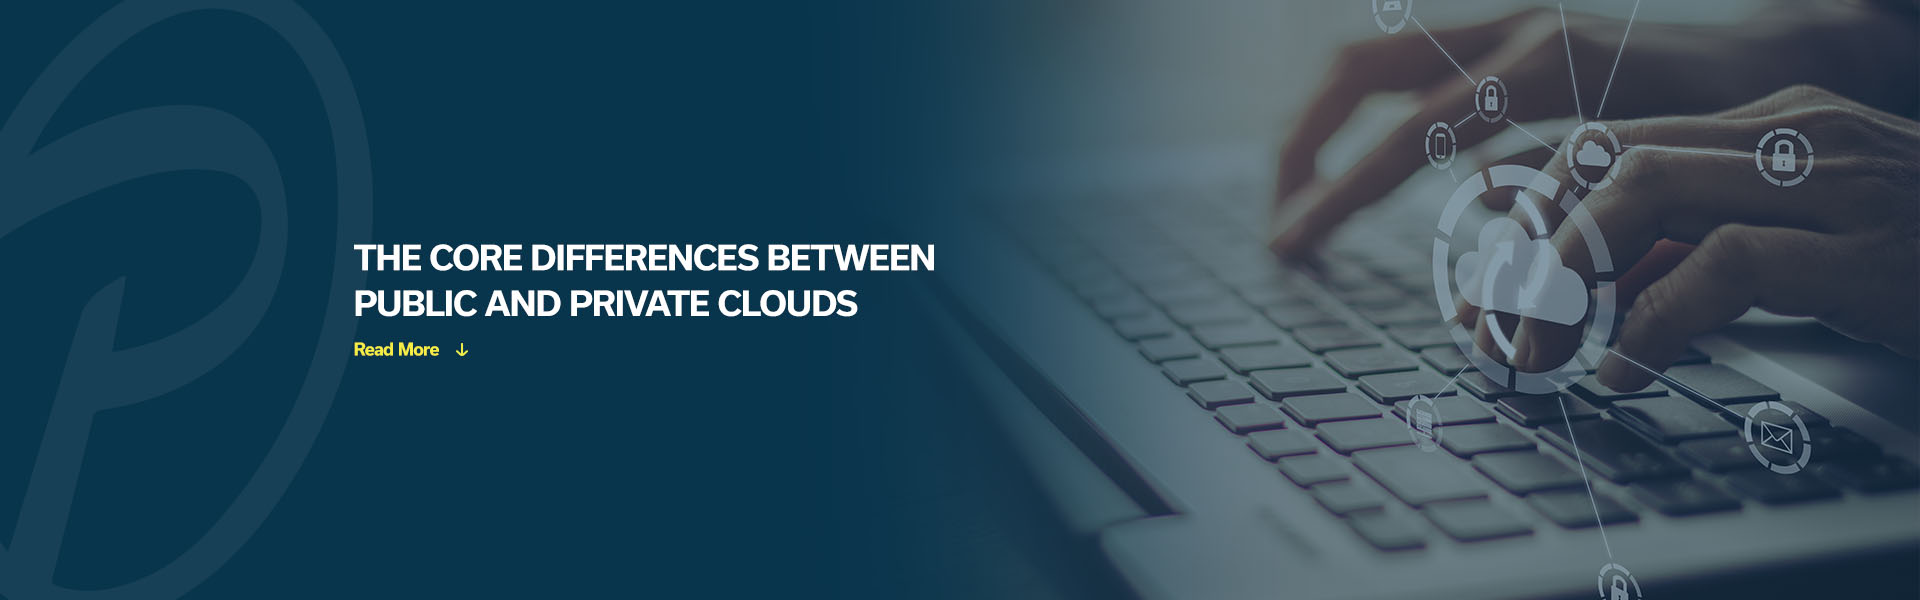 07-the-core-differences-between-public-and-private-clouds